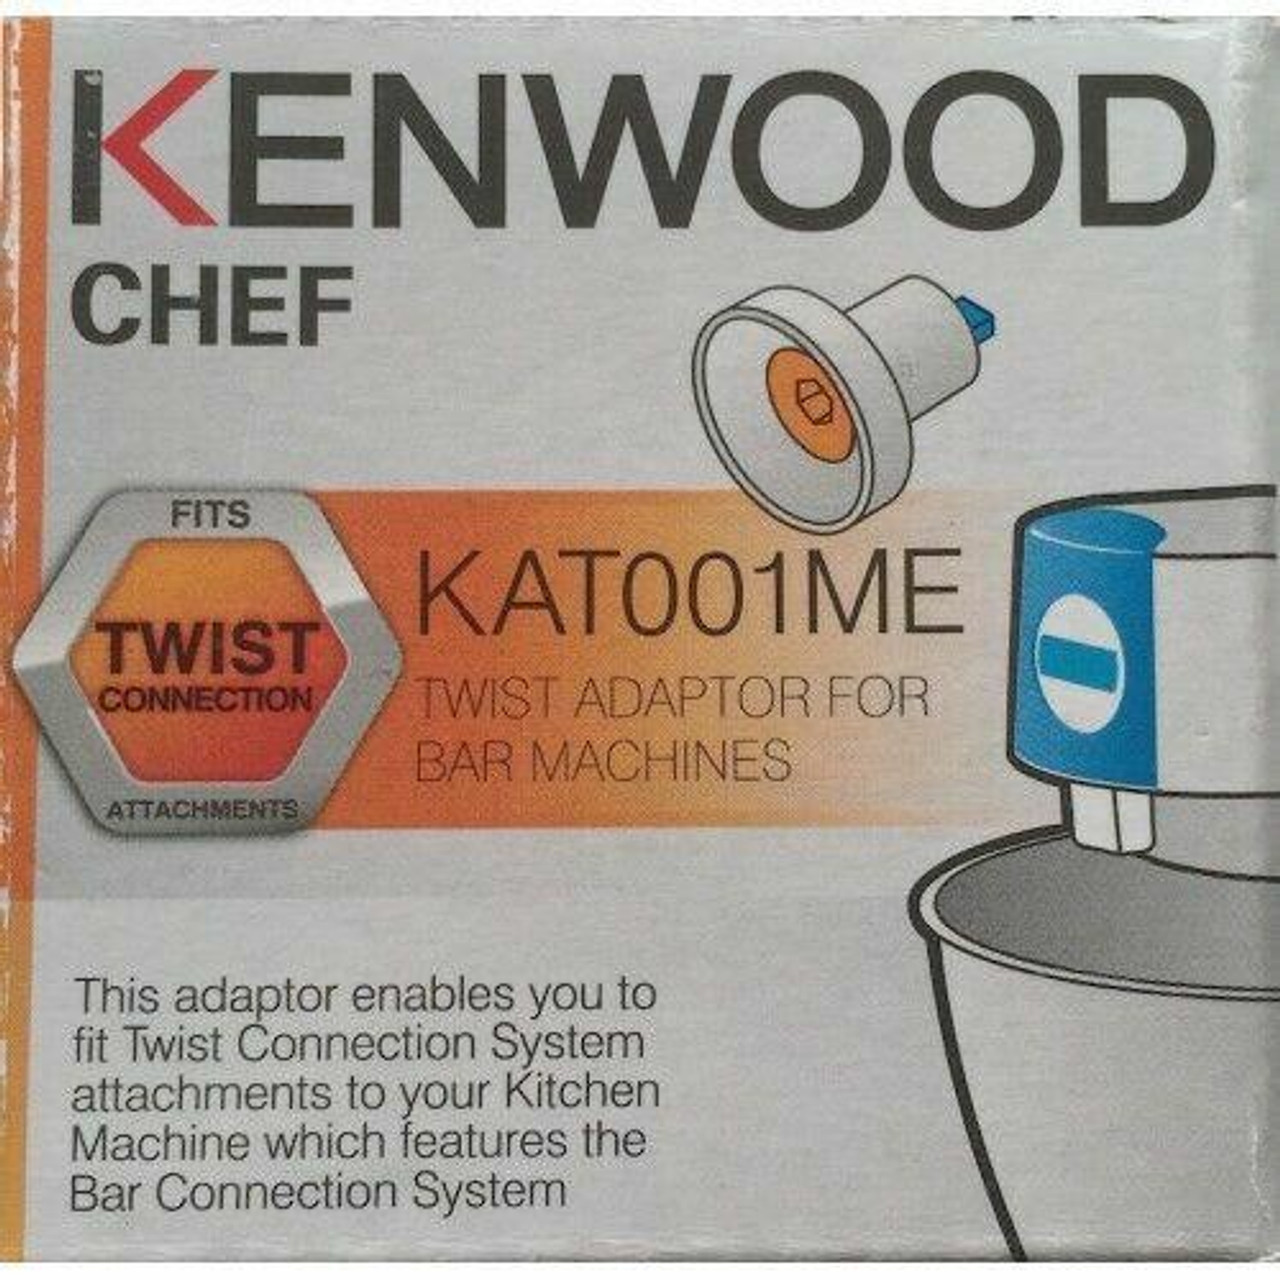 Kenwood AT910 Pasta Maker Attachment